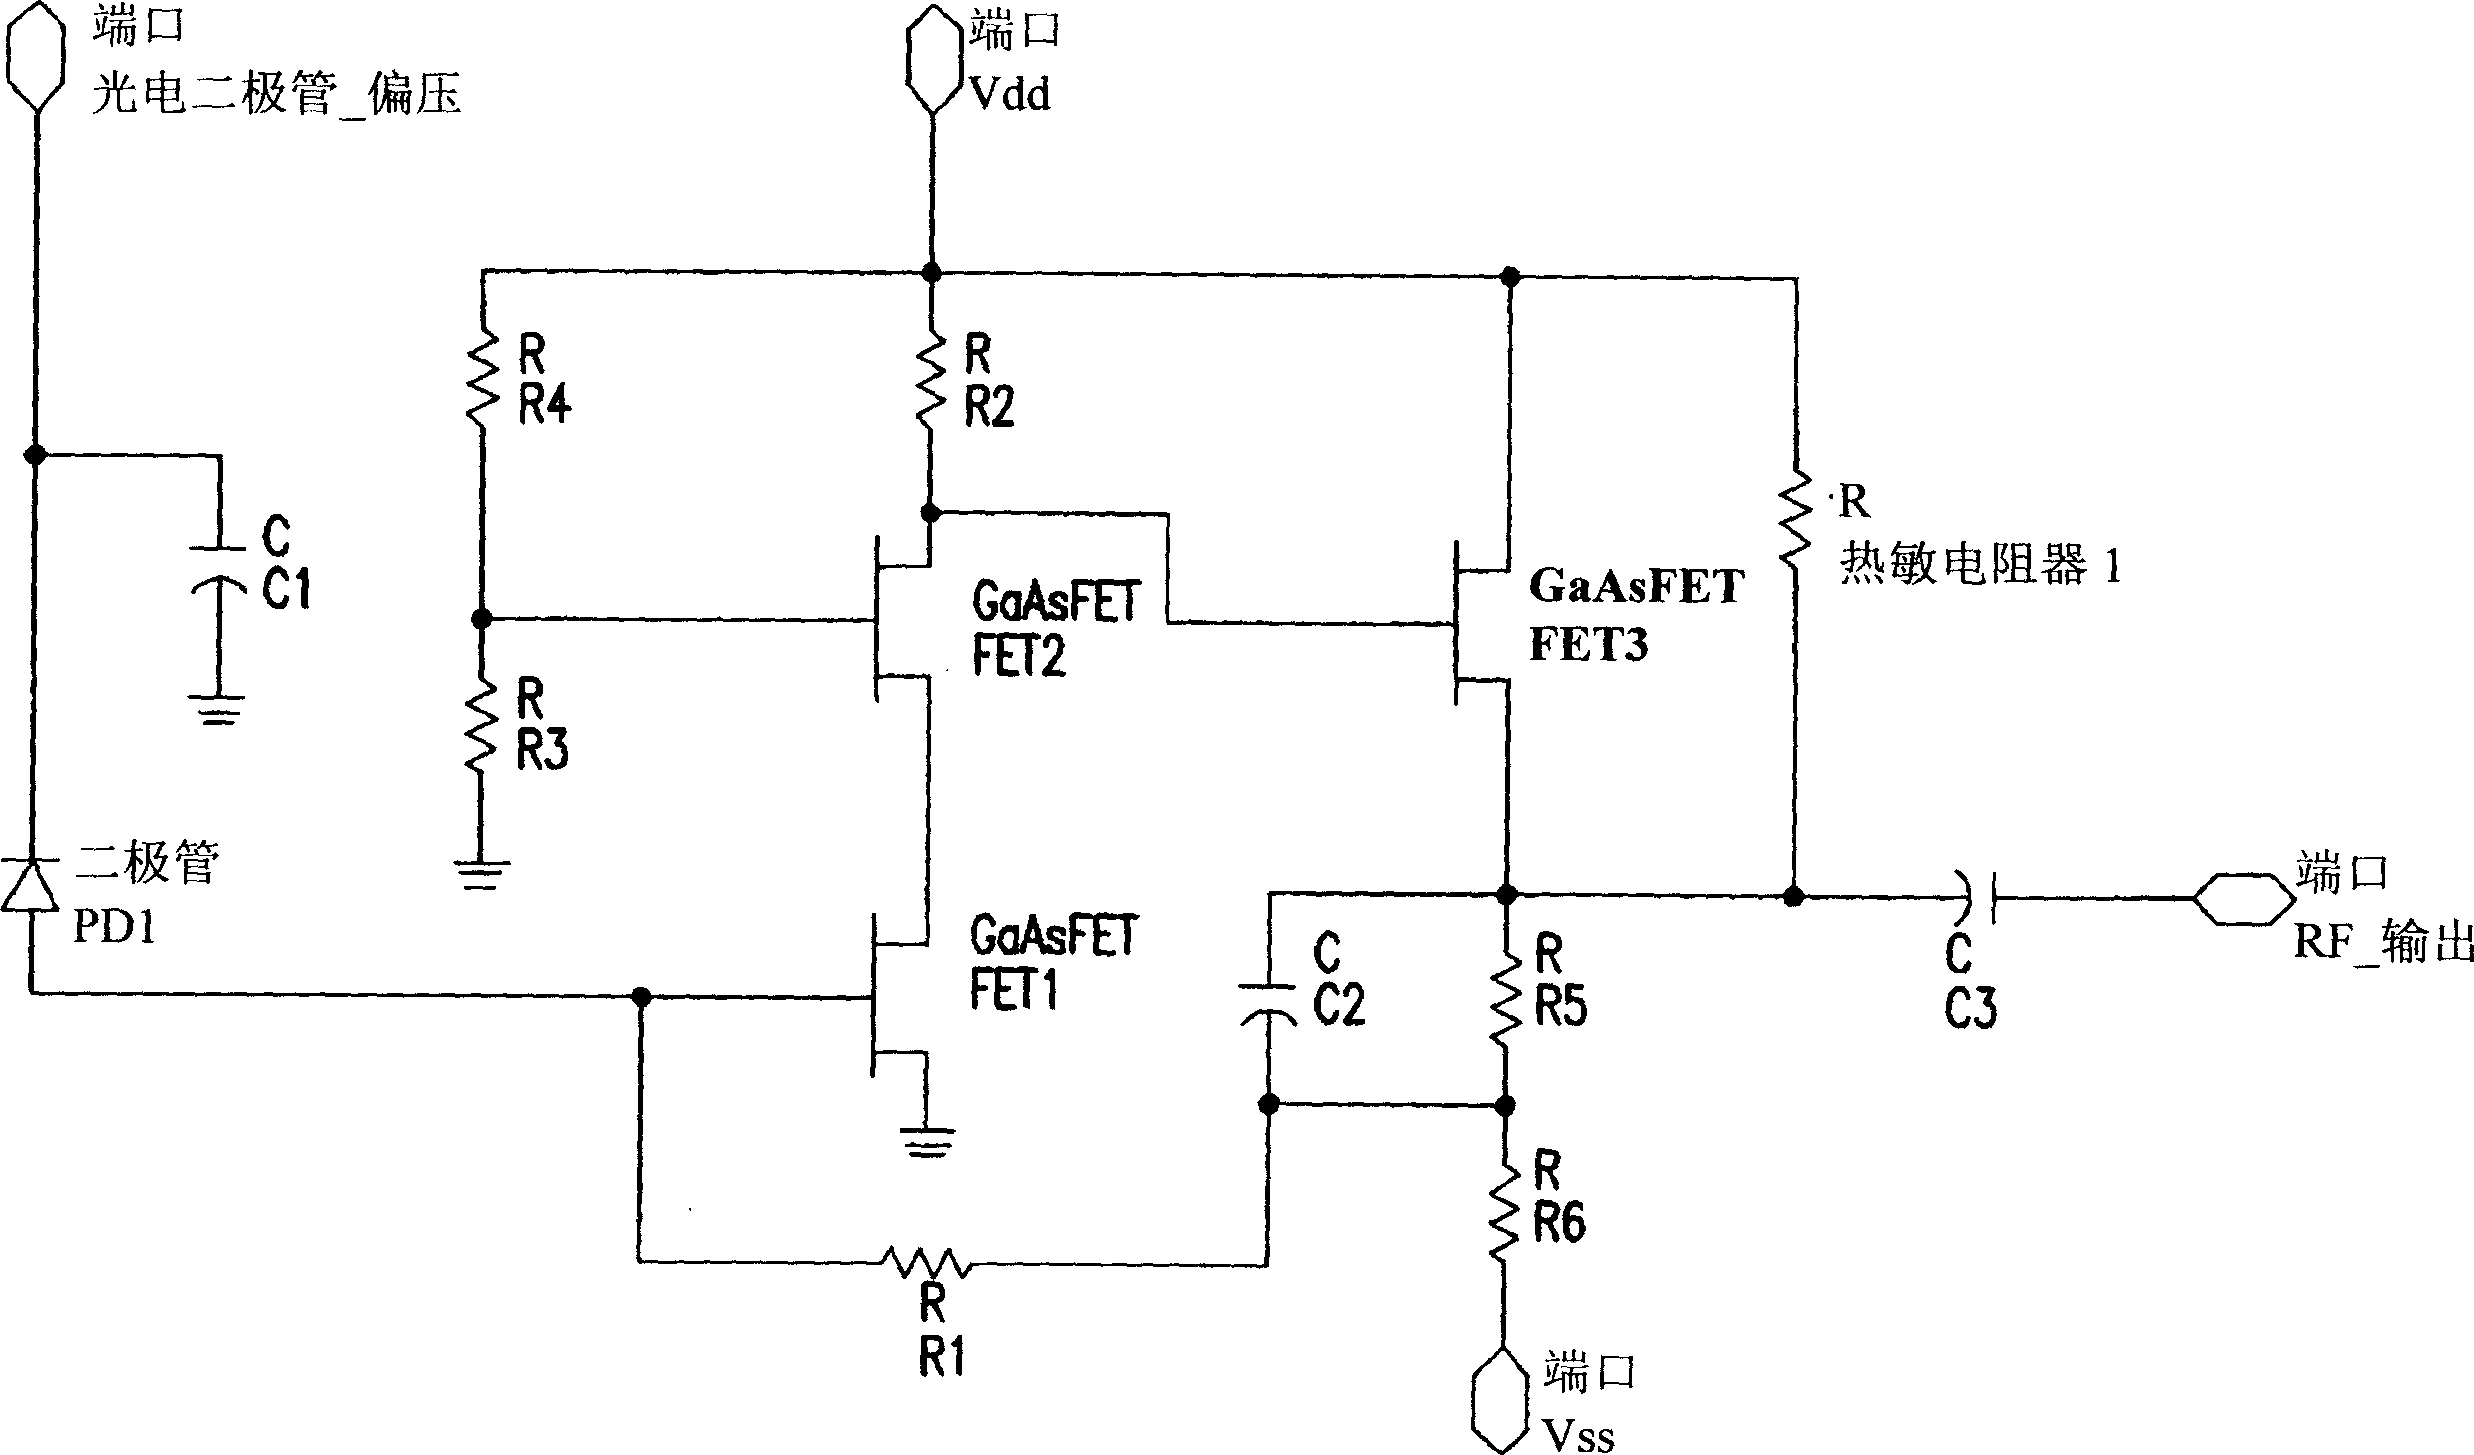 Distortion cancellation in a transimpedance amplifier circuit